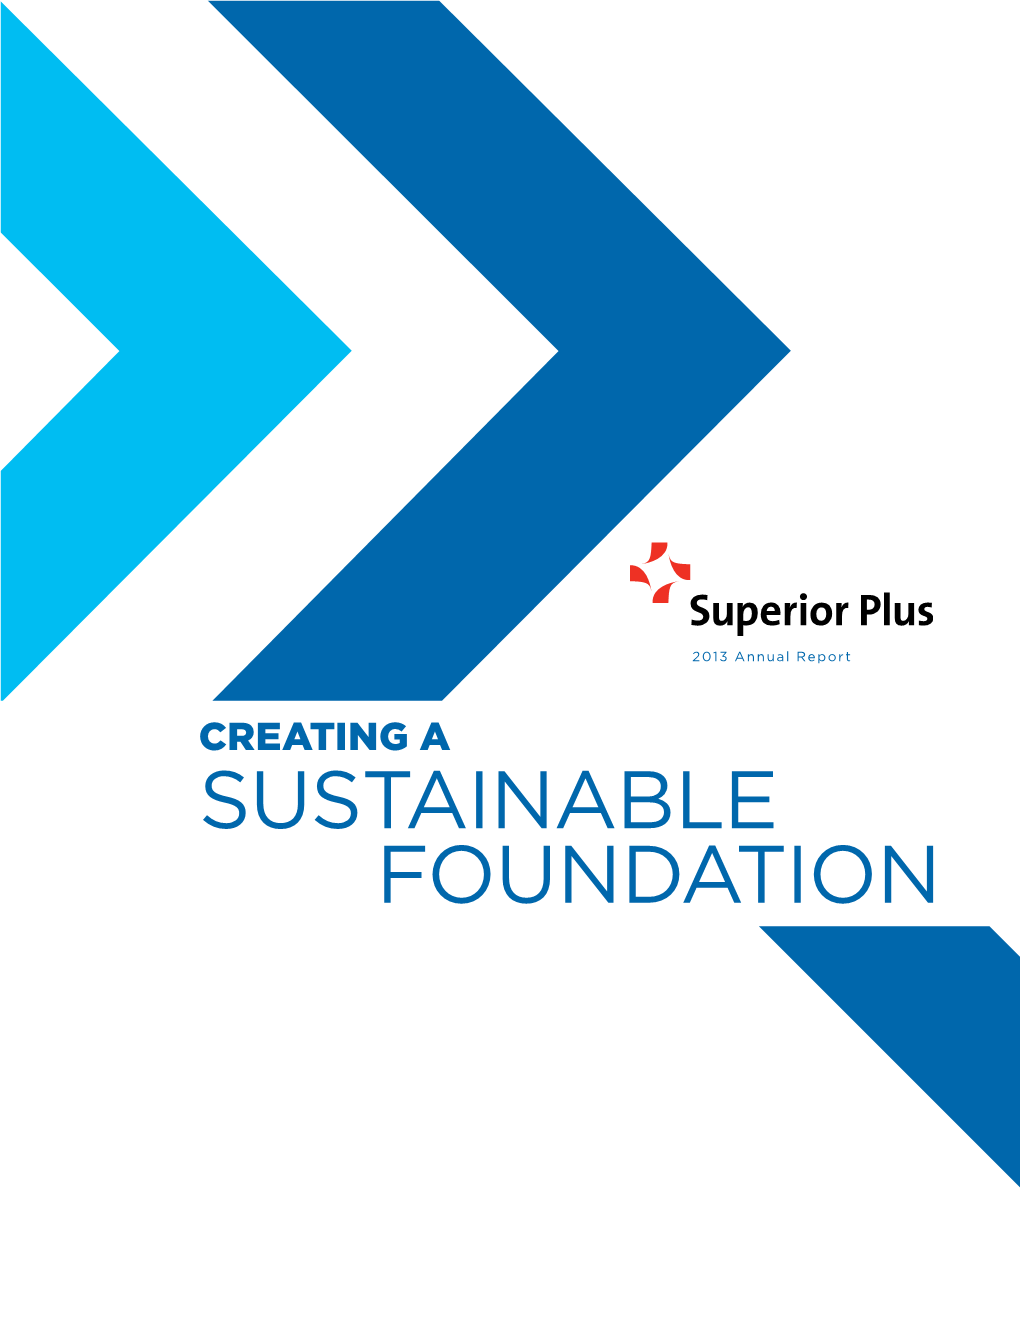 SUSTAINABLE Foundation Financial Results (Millions of Dollars) 2013 2012